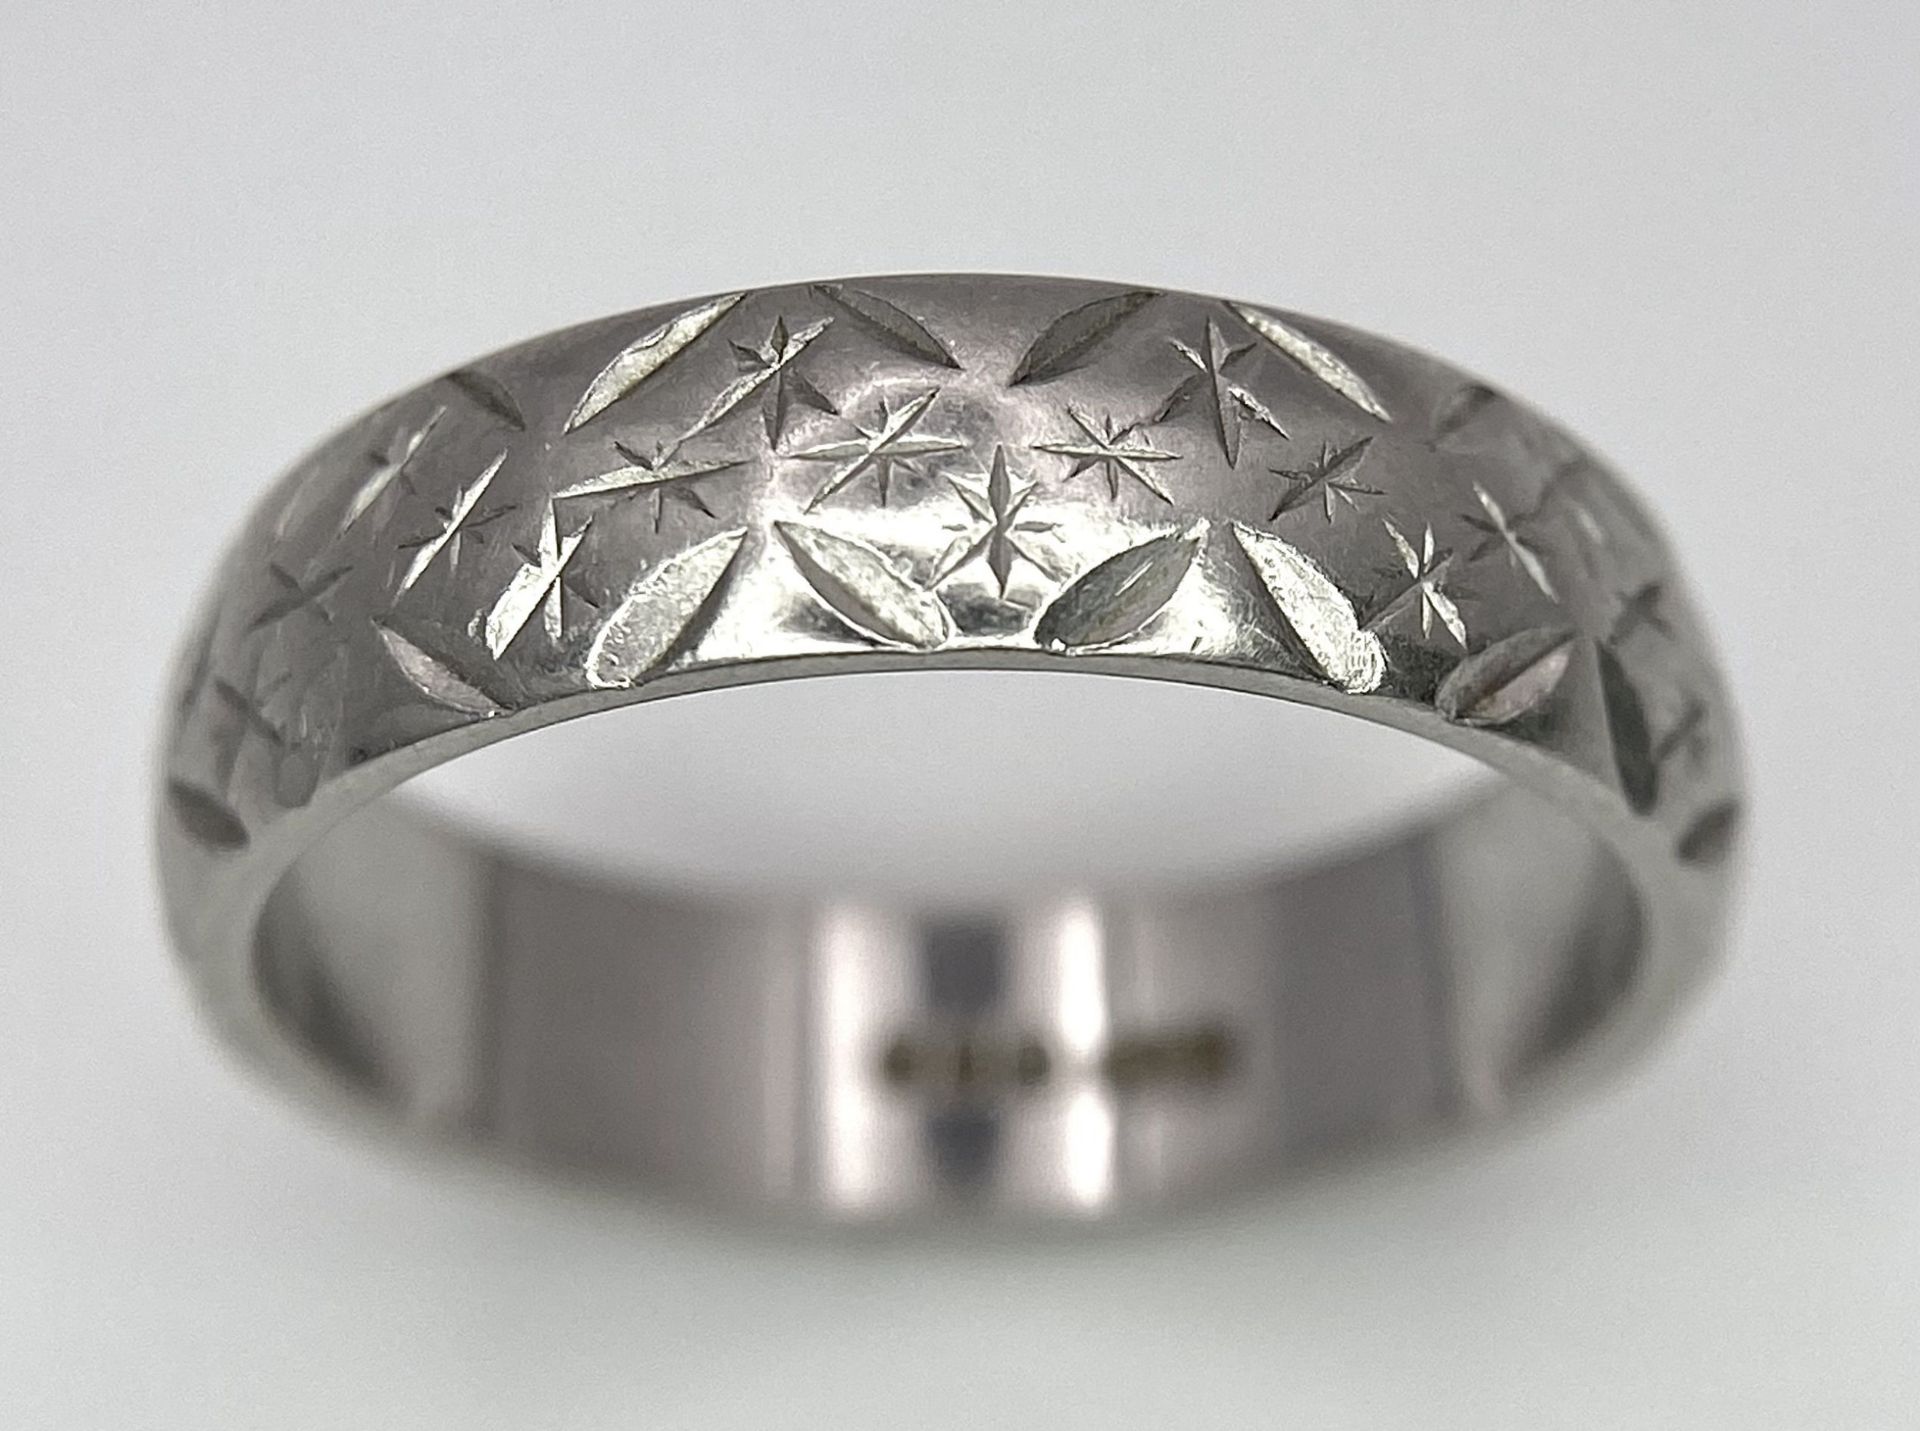 A Vintage Platinum Band Ring with Geometric Decorative Pattern. 5mm width. Size P. 7.5g - Image 3 of 6